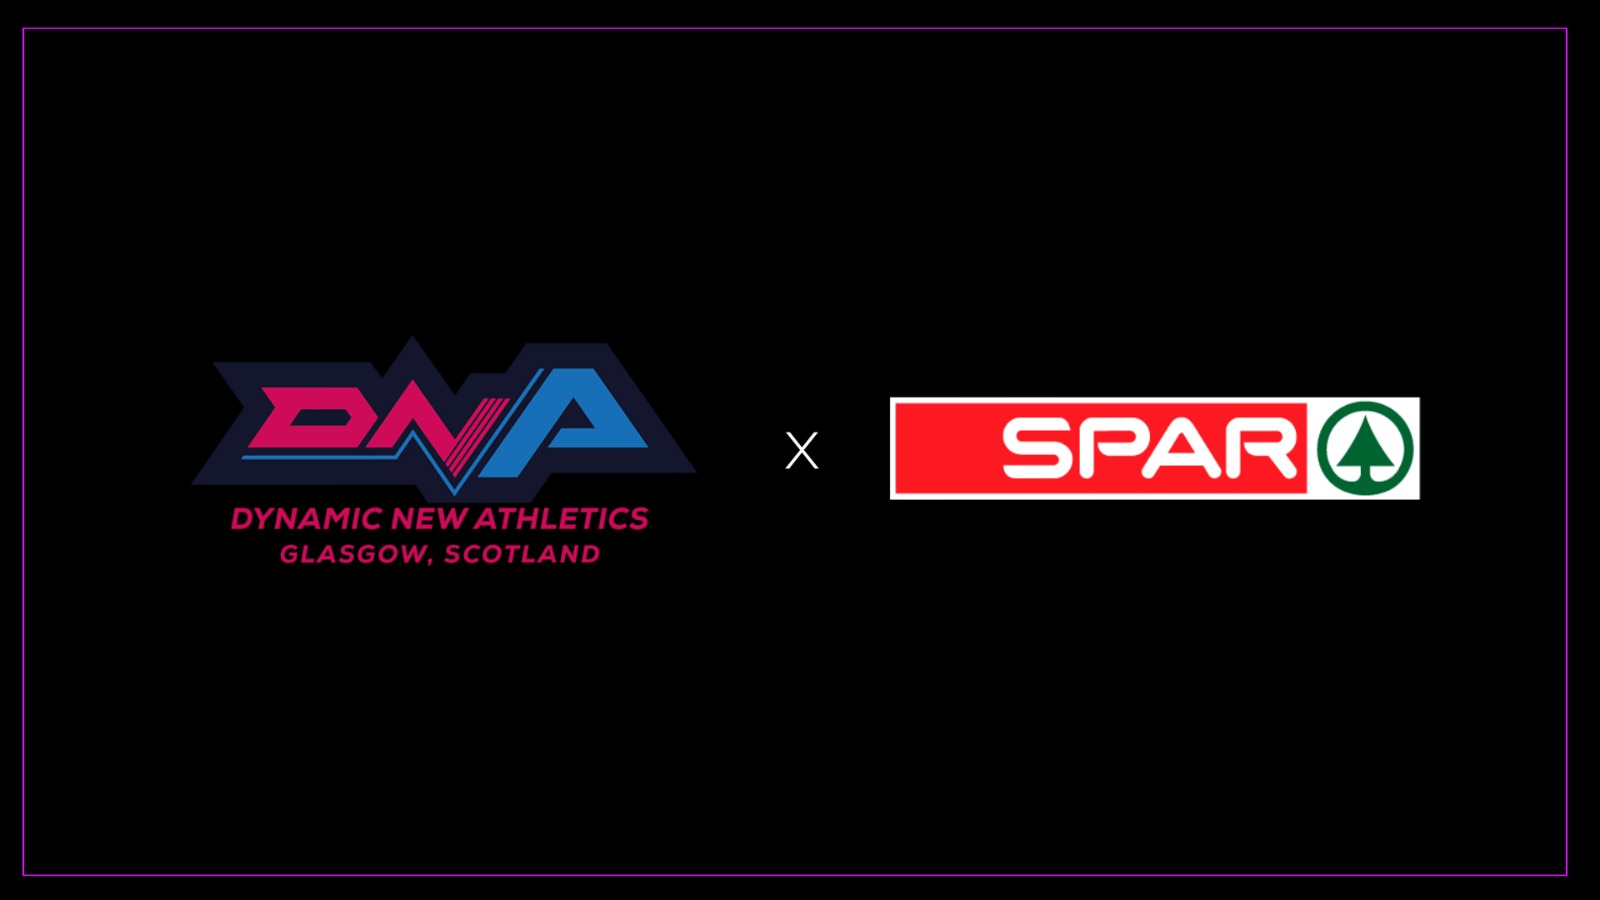 SPAR to sponsor Dynamic New Athletics competition in Glasgow